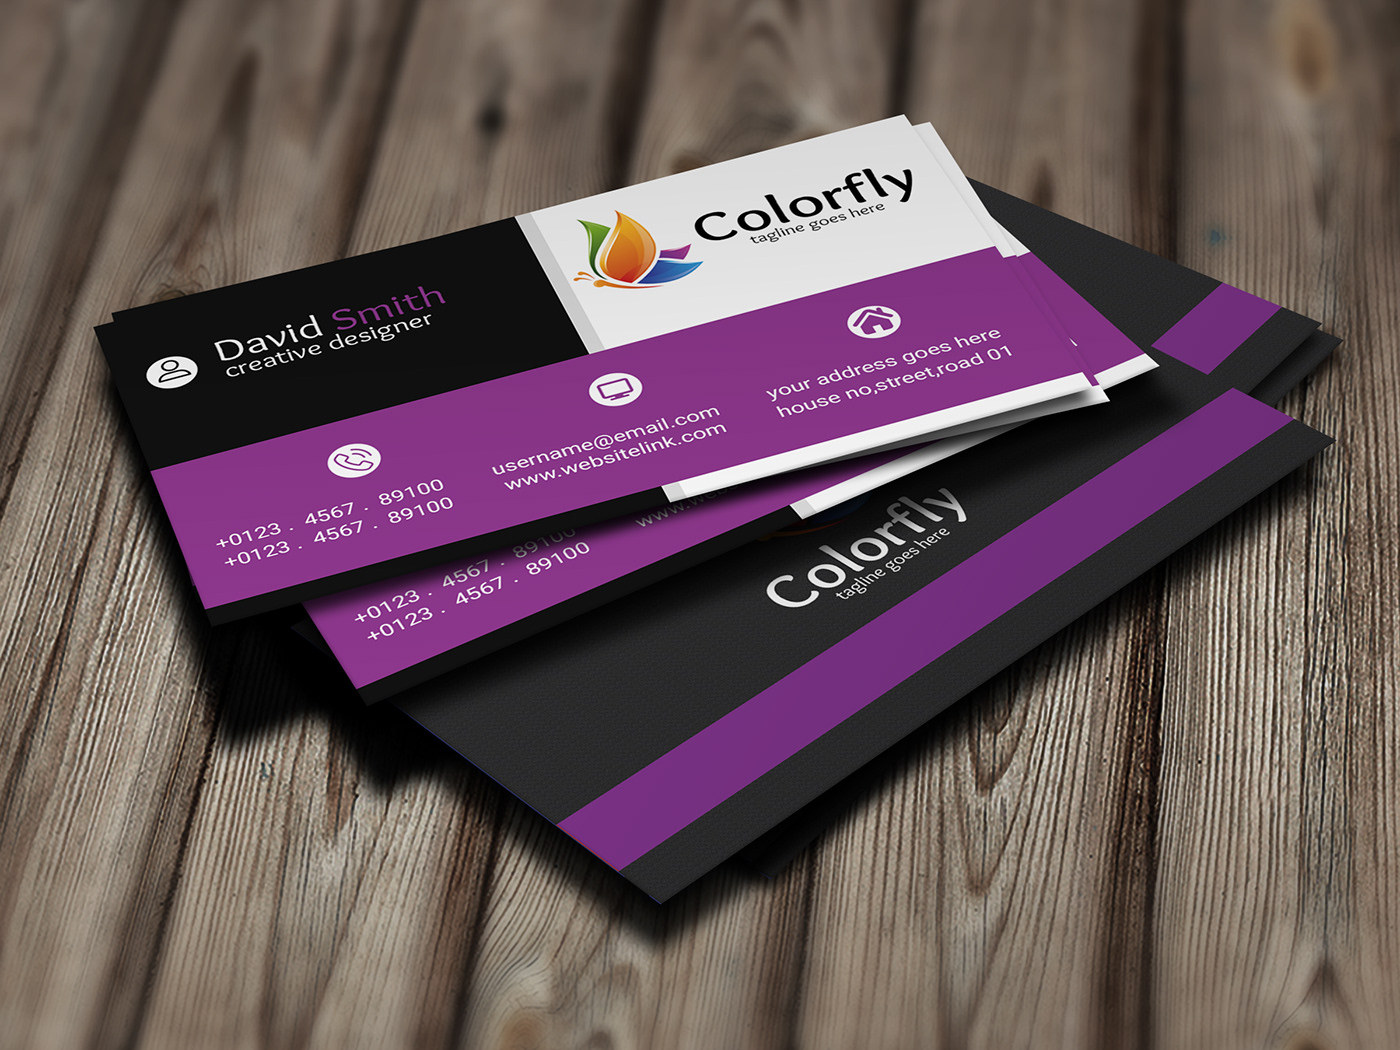 websites to create a business card